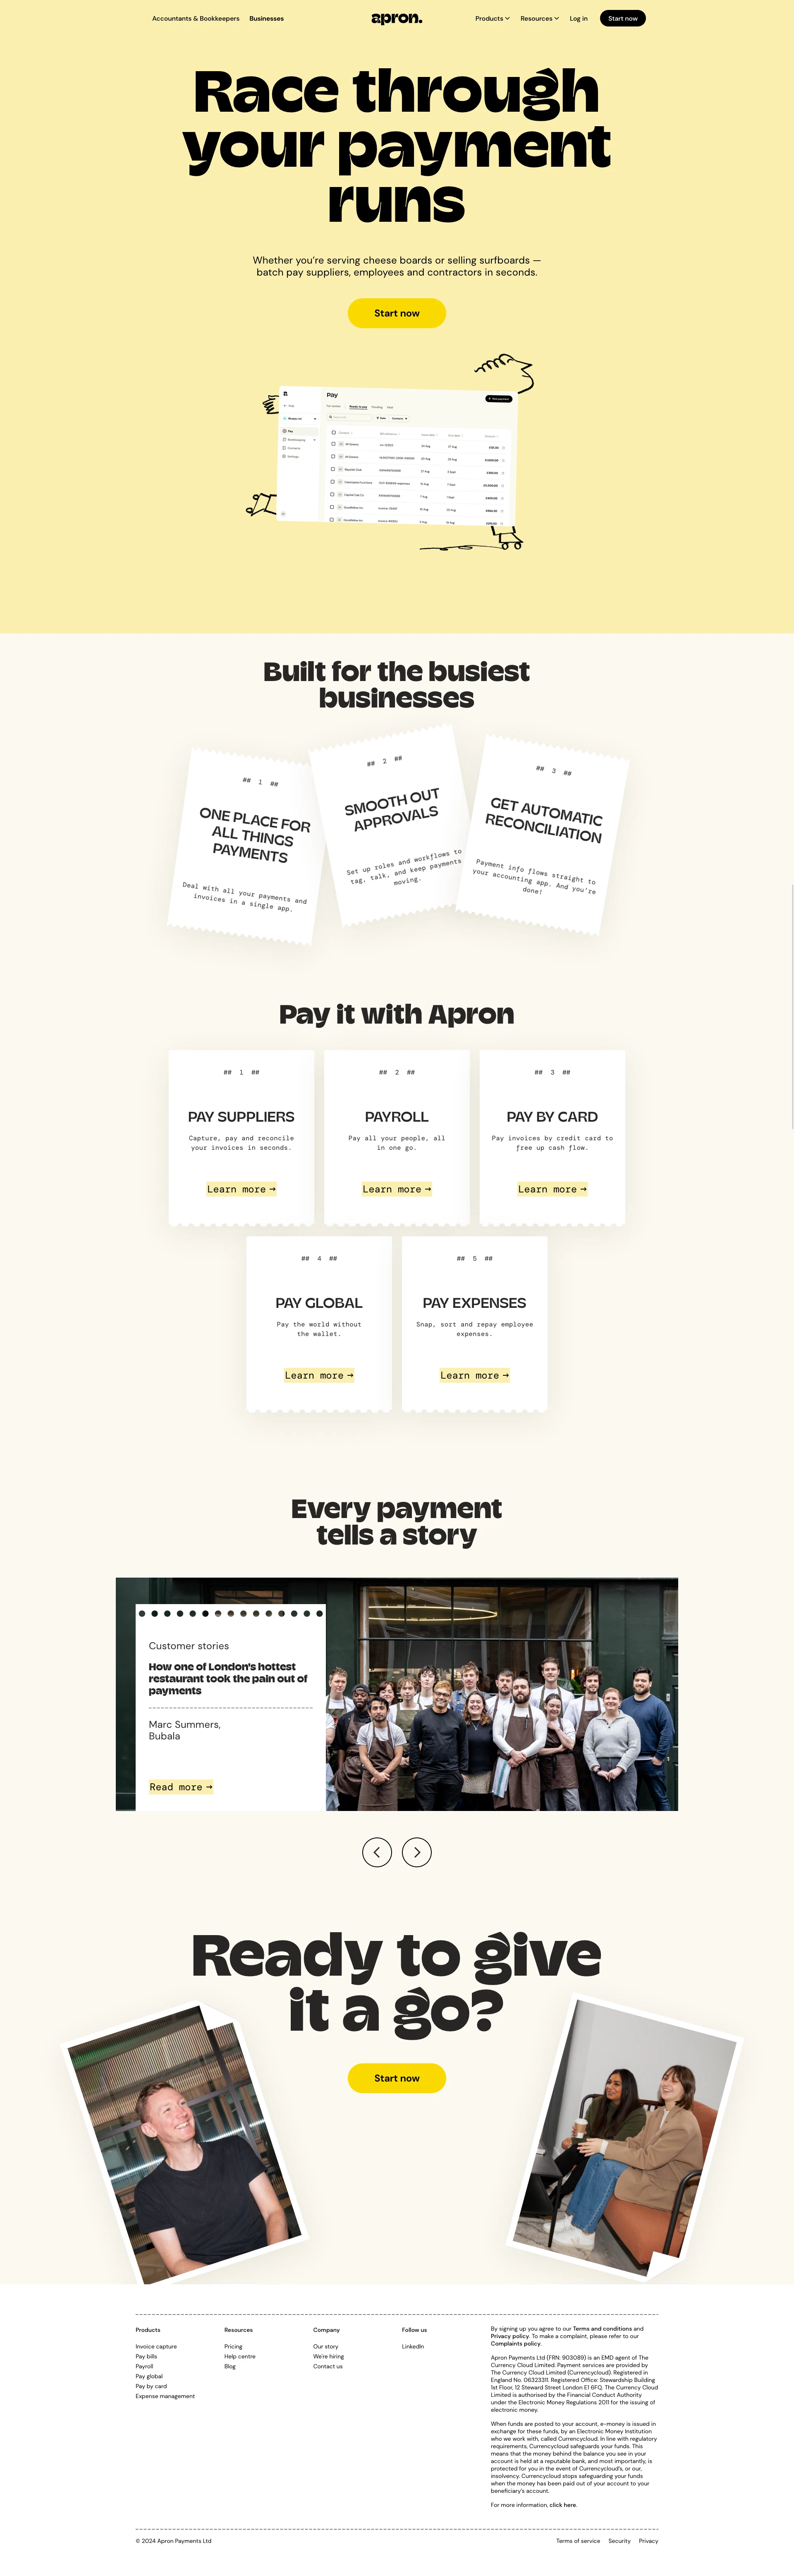 Apron Landing Page Example: Sort, pay and reconcile your invoices in seconds. Go for a walk. Reply to your mum. Plan for the future. Get creative again… You can do a lot when payments don’t eat into your week.